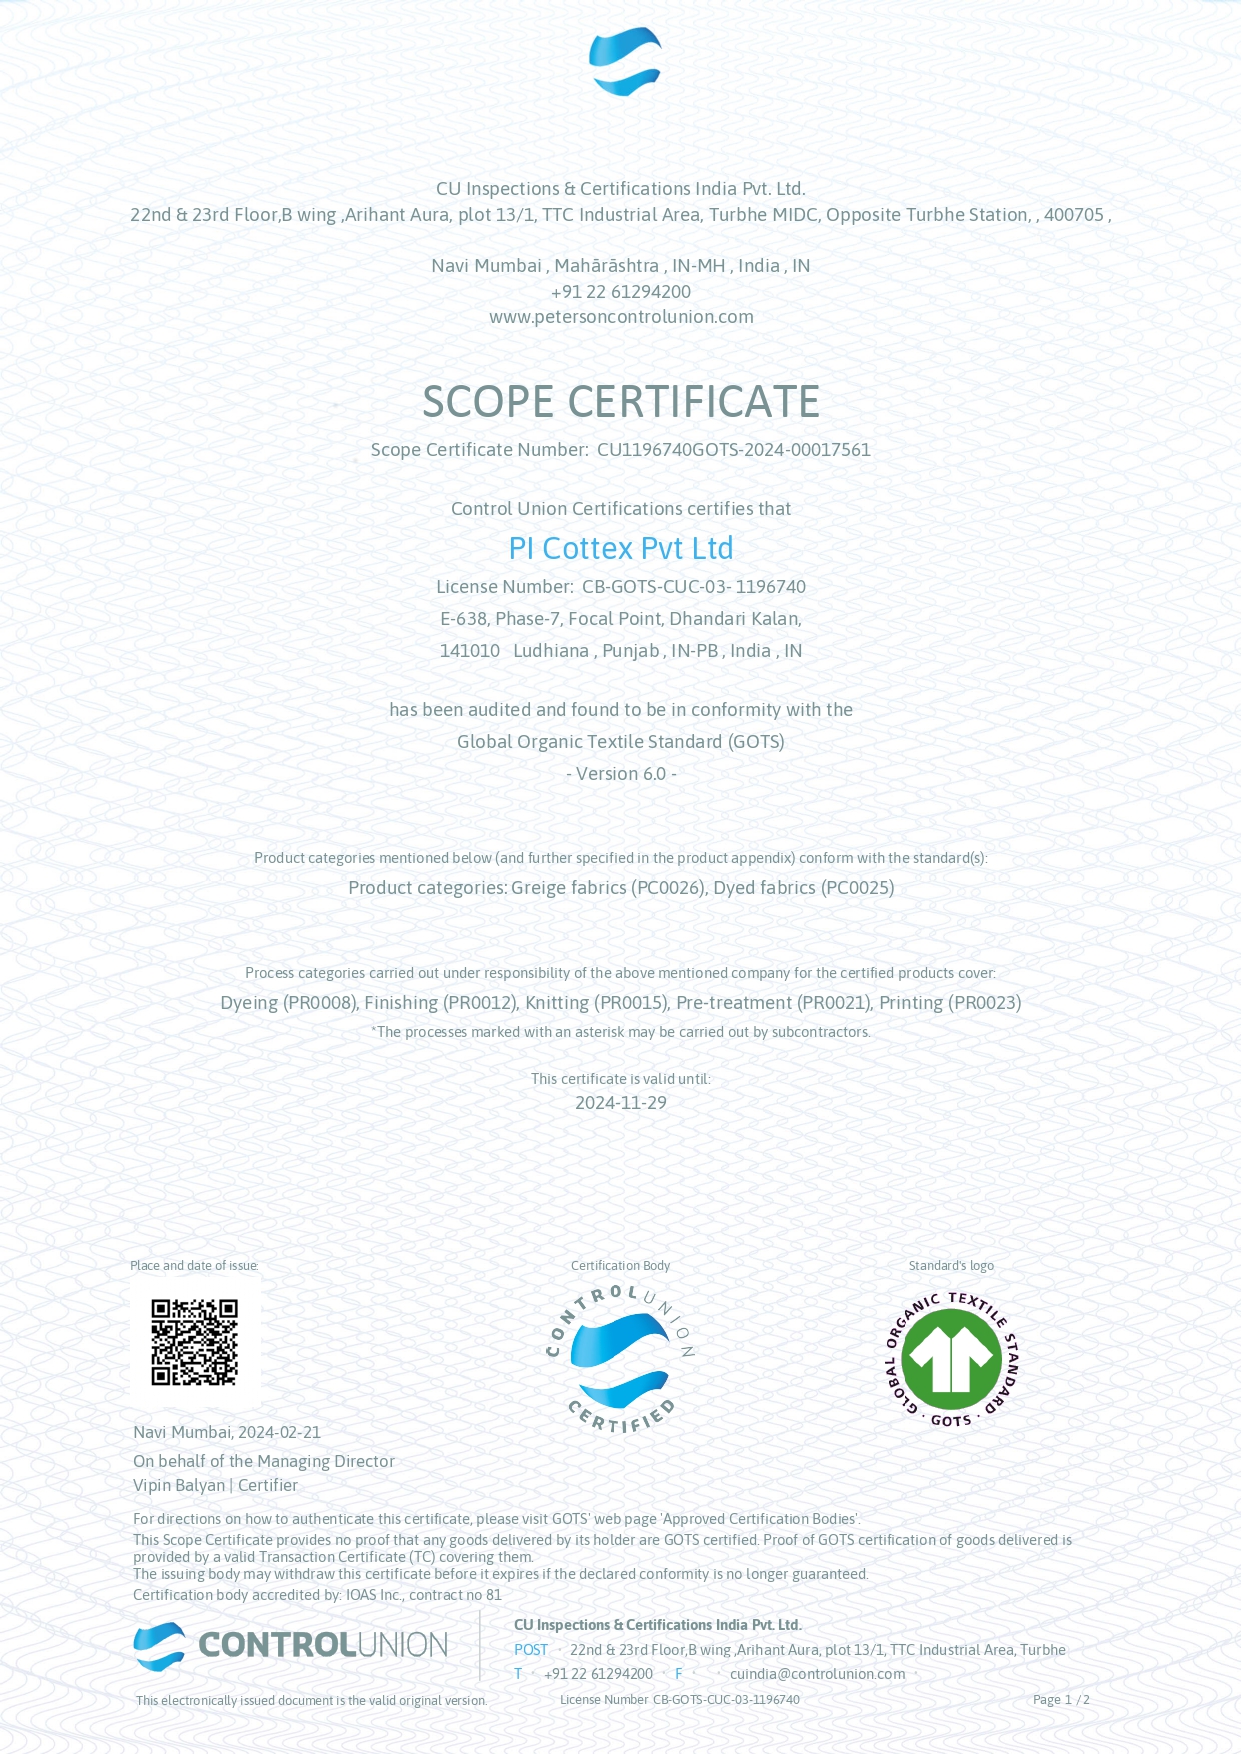 PI Cottexx Trusted By global organic Textile Standard